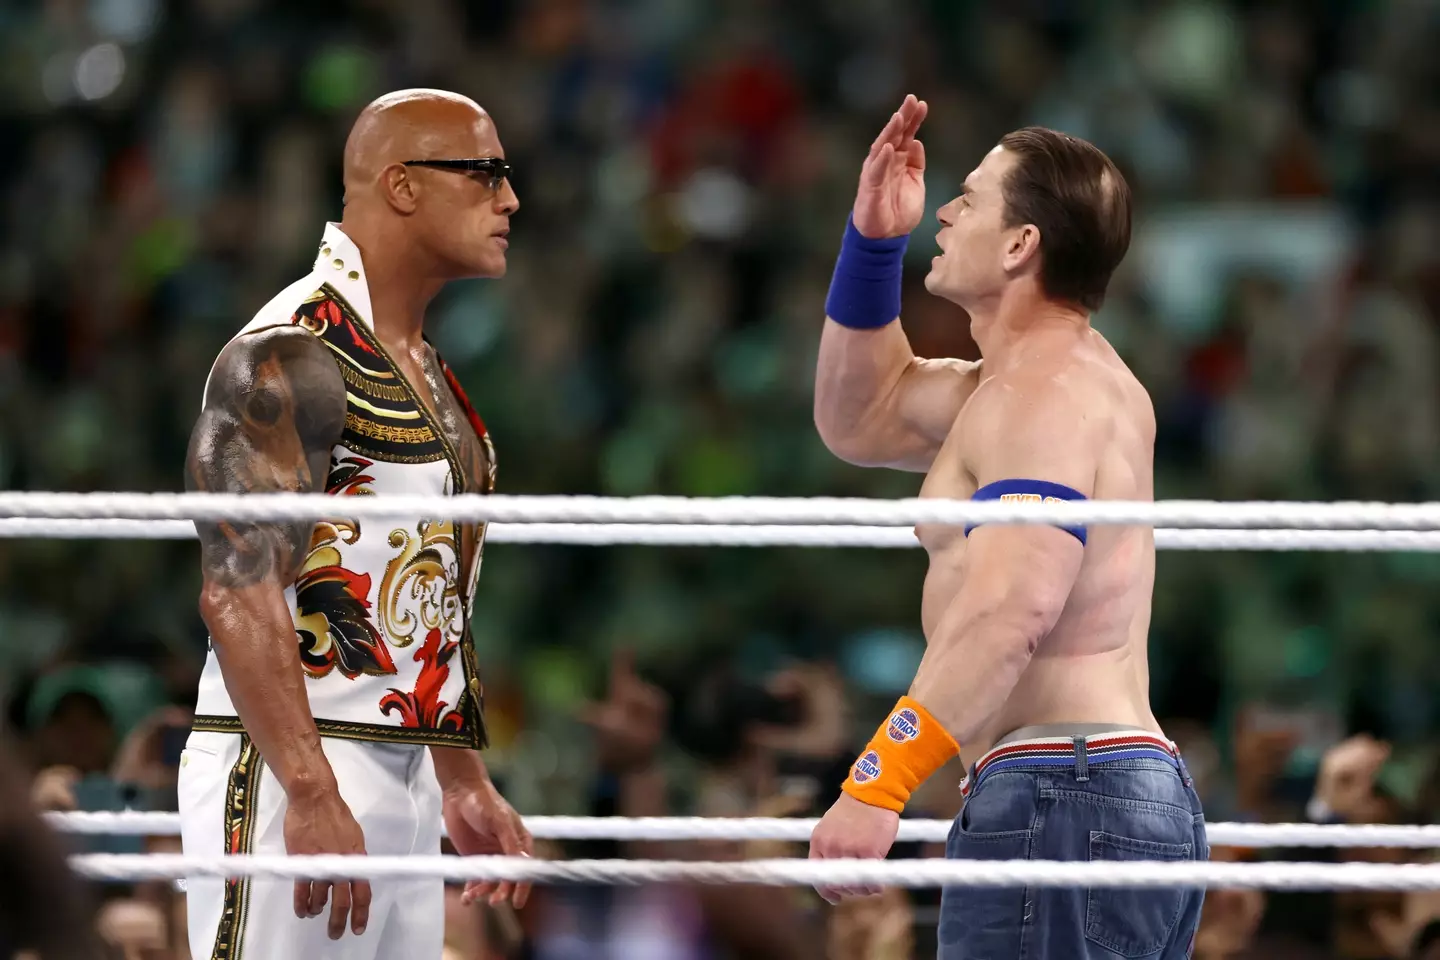 The Rock squares off against John Cena. Tim Nwachukwu/Getty Images